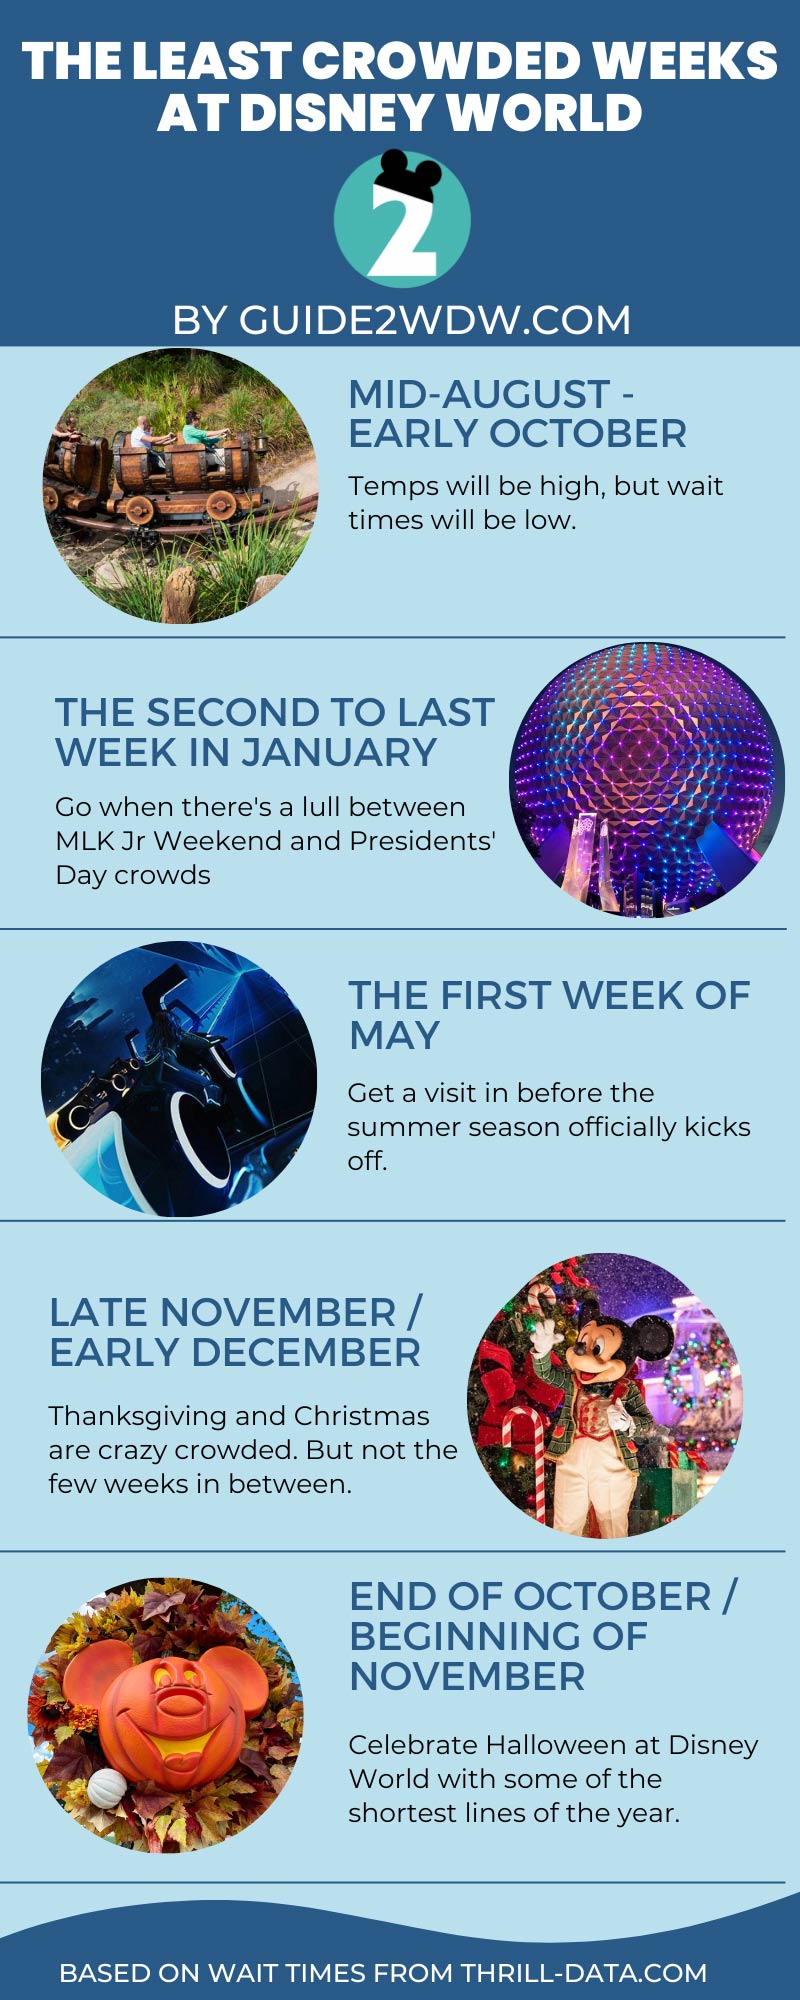 The Least Crowded Weeks at Disney World - Infographic - Guide2WDW